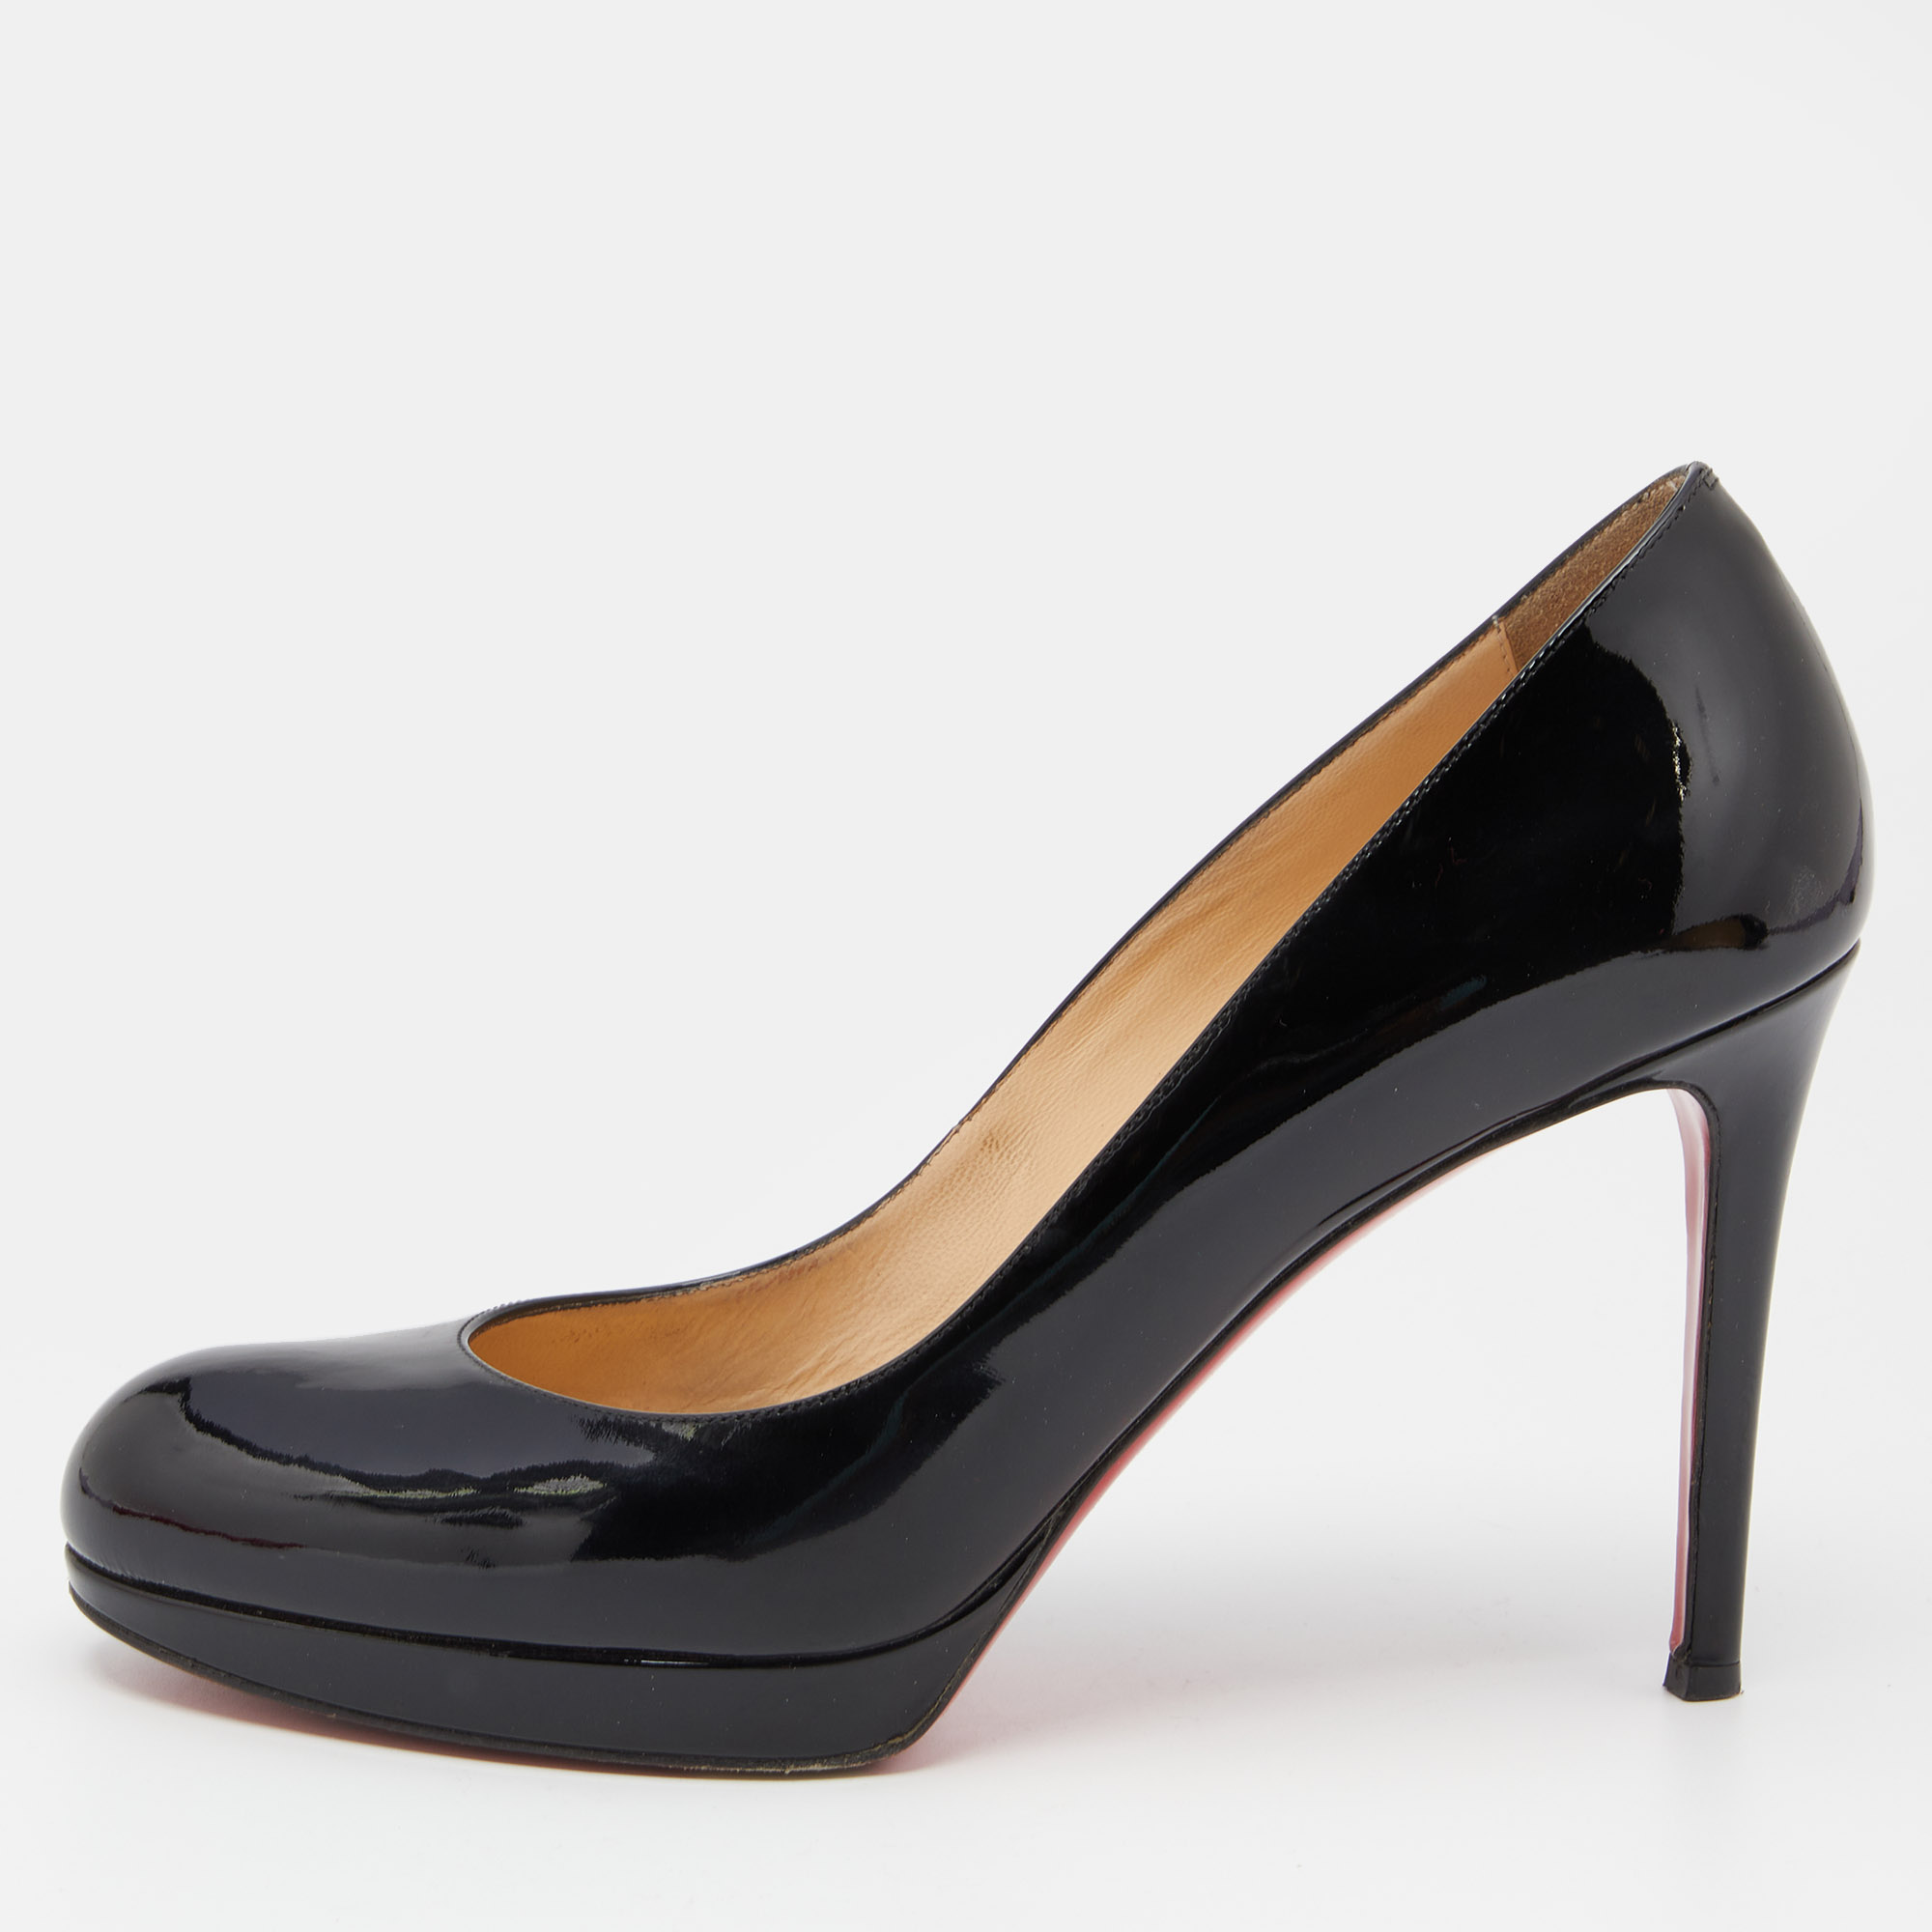 Pre-owned Christian Louboutin Black Patent Leather New Simple Pumps Size 38.5